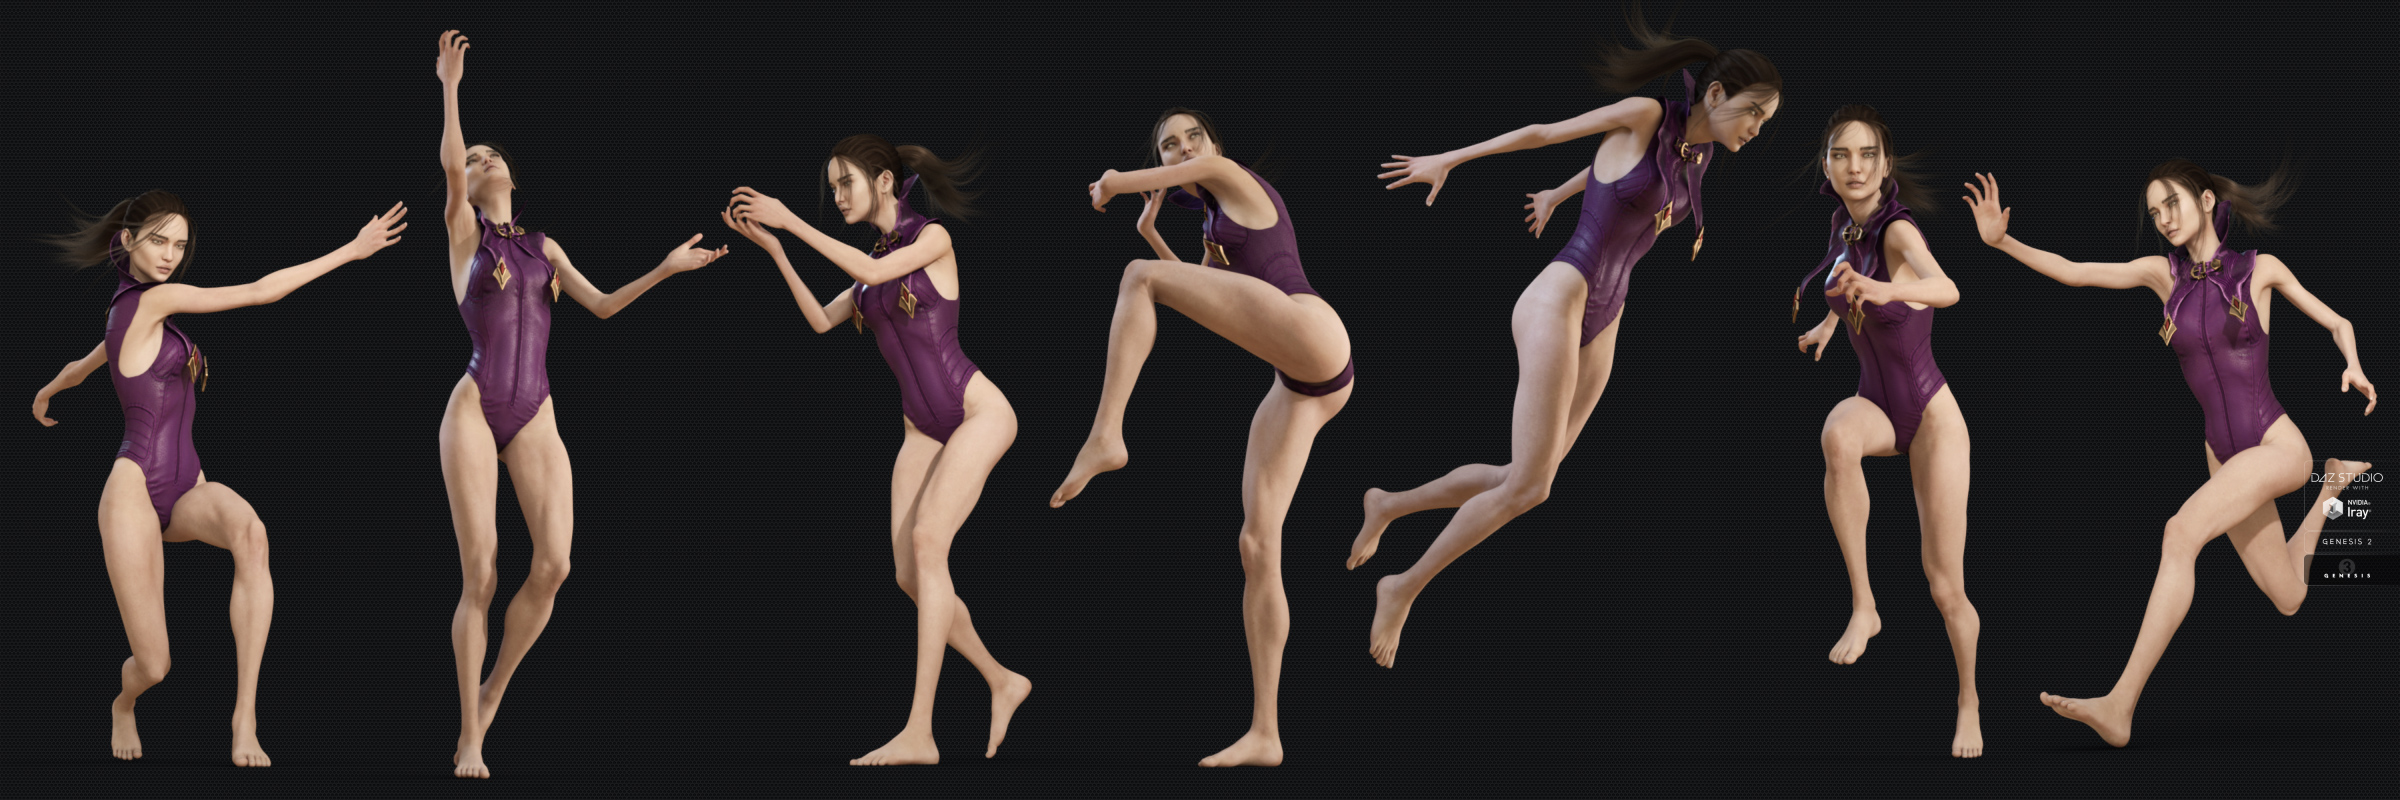 ACTIVE - Magic Poses for Genesis 2 and 3 Female by: Neikdian, 3D Models by Daz 3D